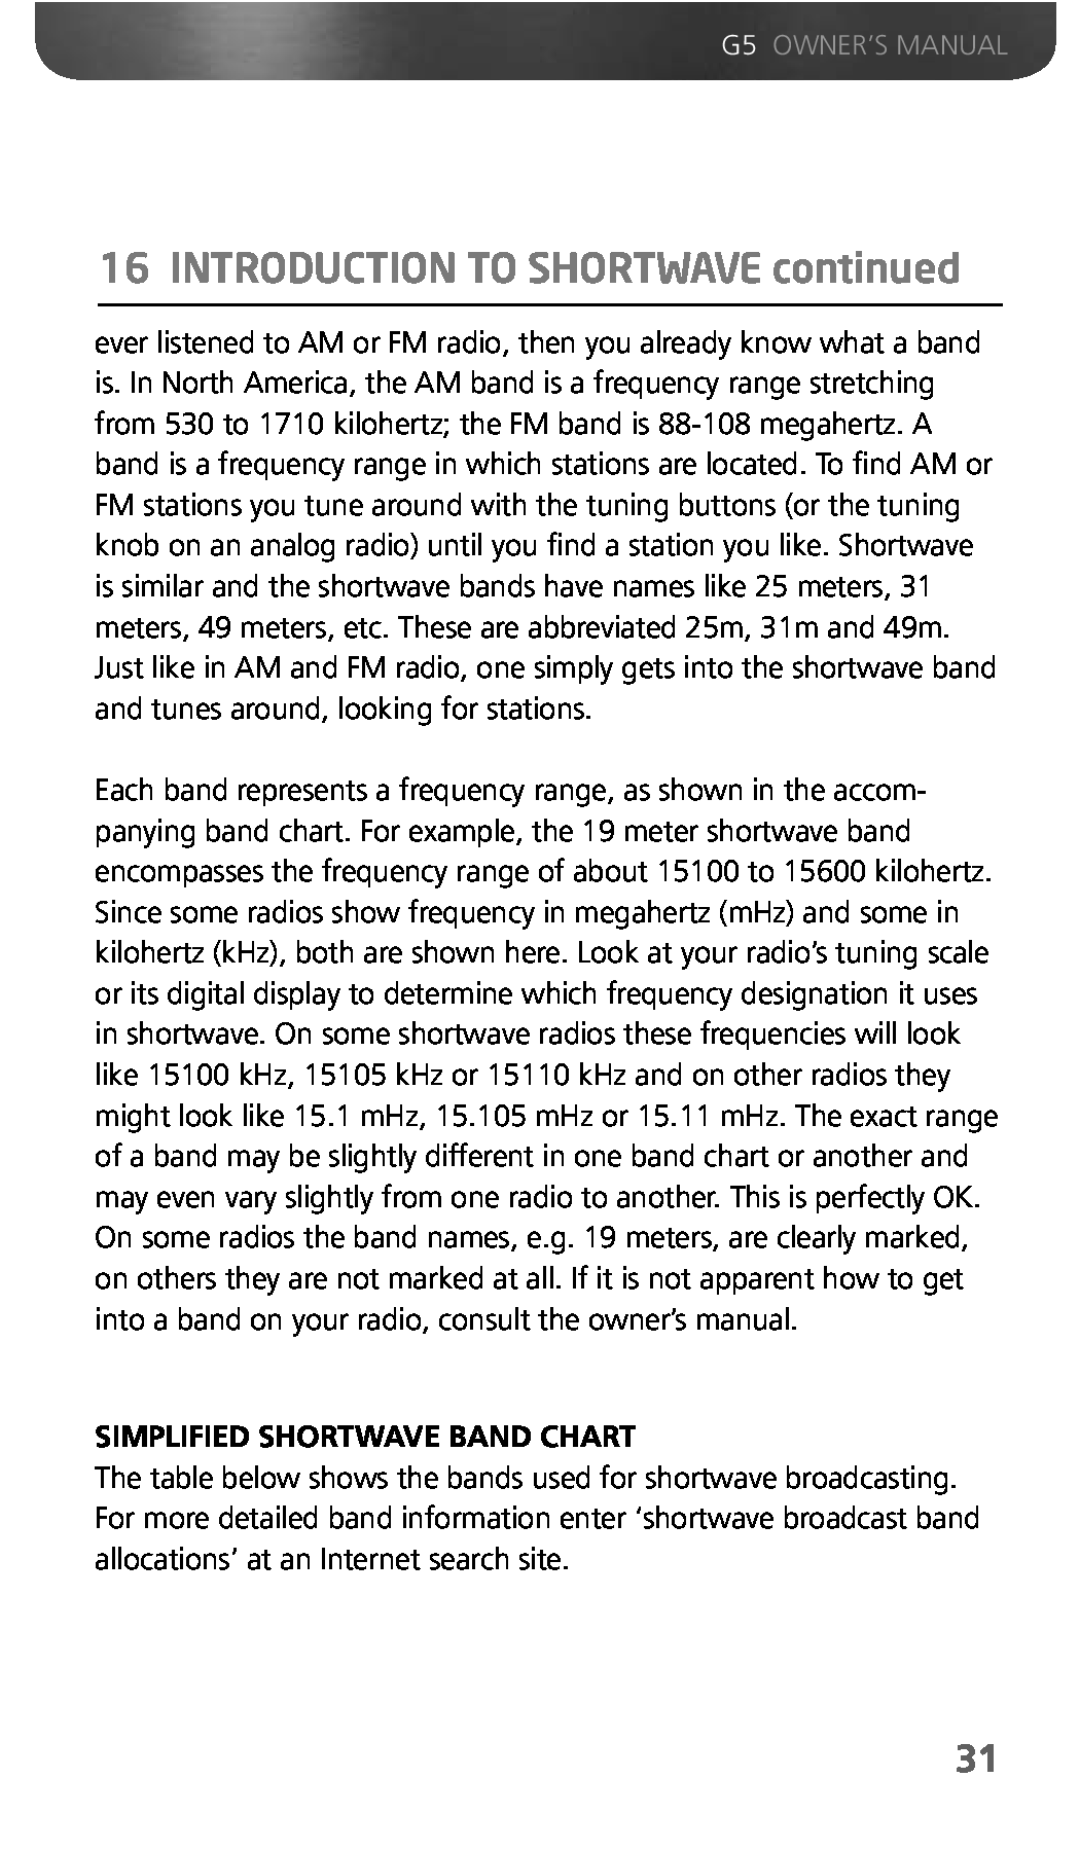 Eton G5 owner manual INTRODUCTION TO SHORTWAVE continued, Simplified Shortwave Band Chart 